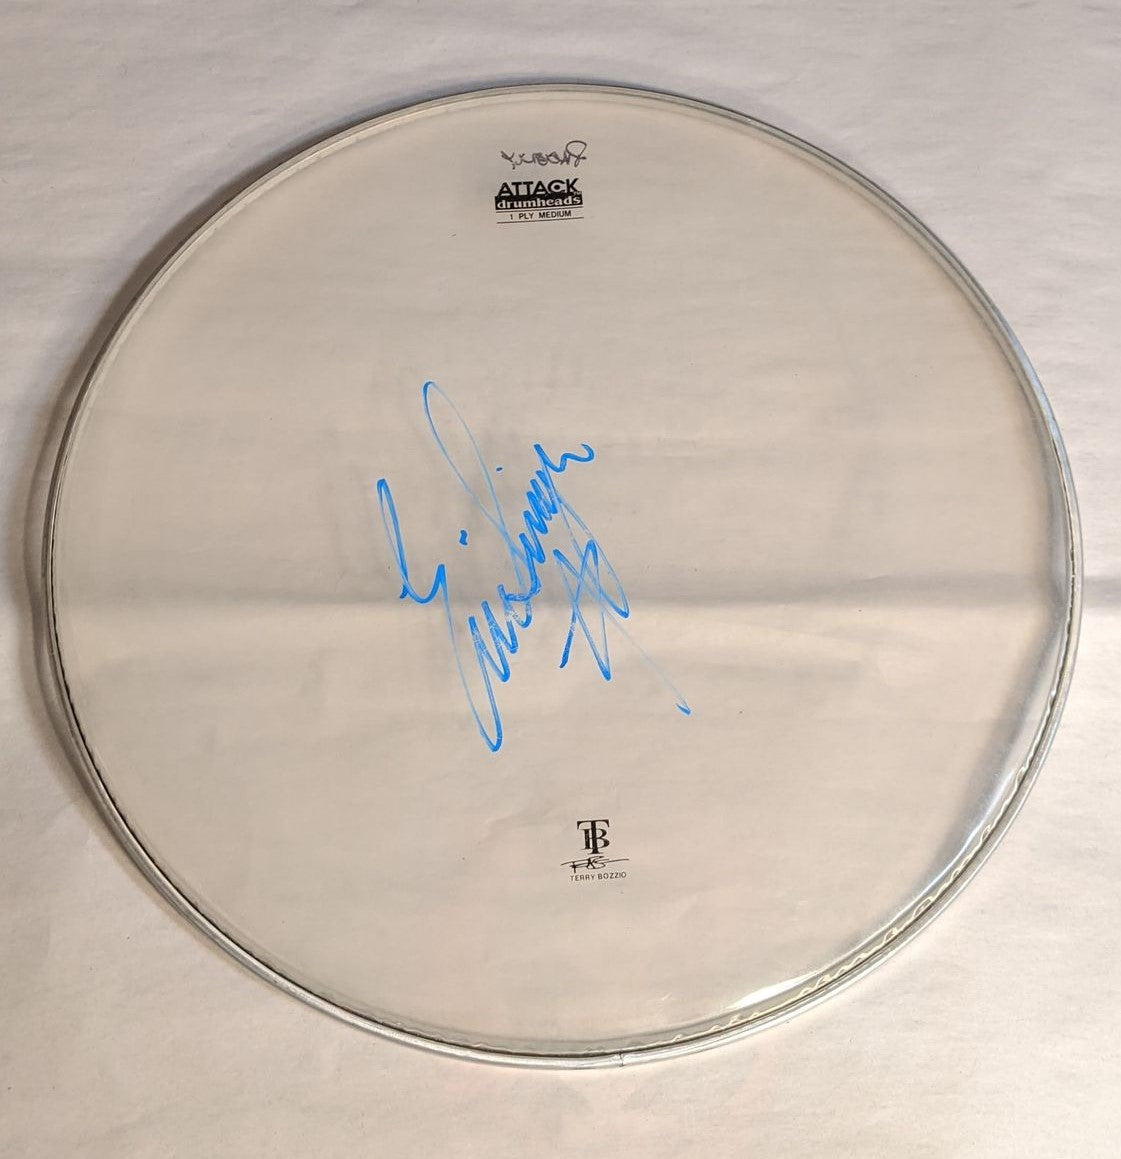 PHOENIX 8-10-2012  ERIC SINGER Stage-Used Signed drumheads